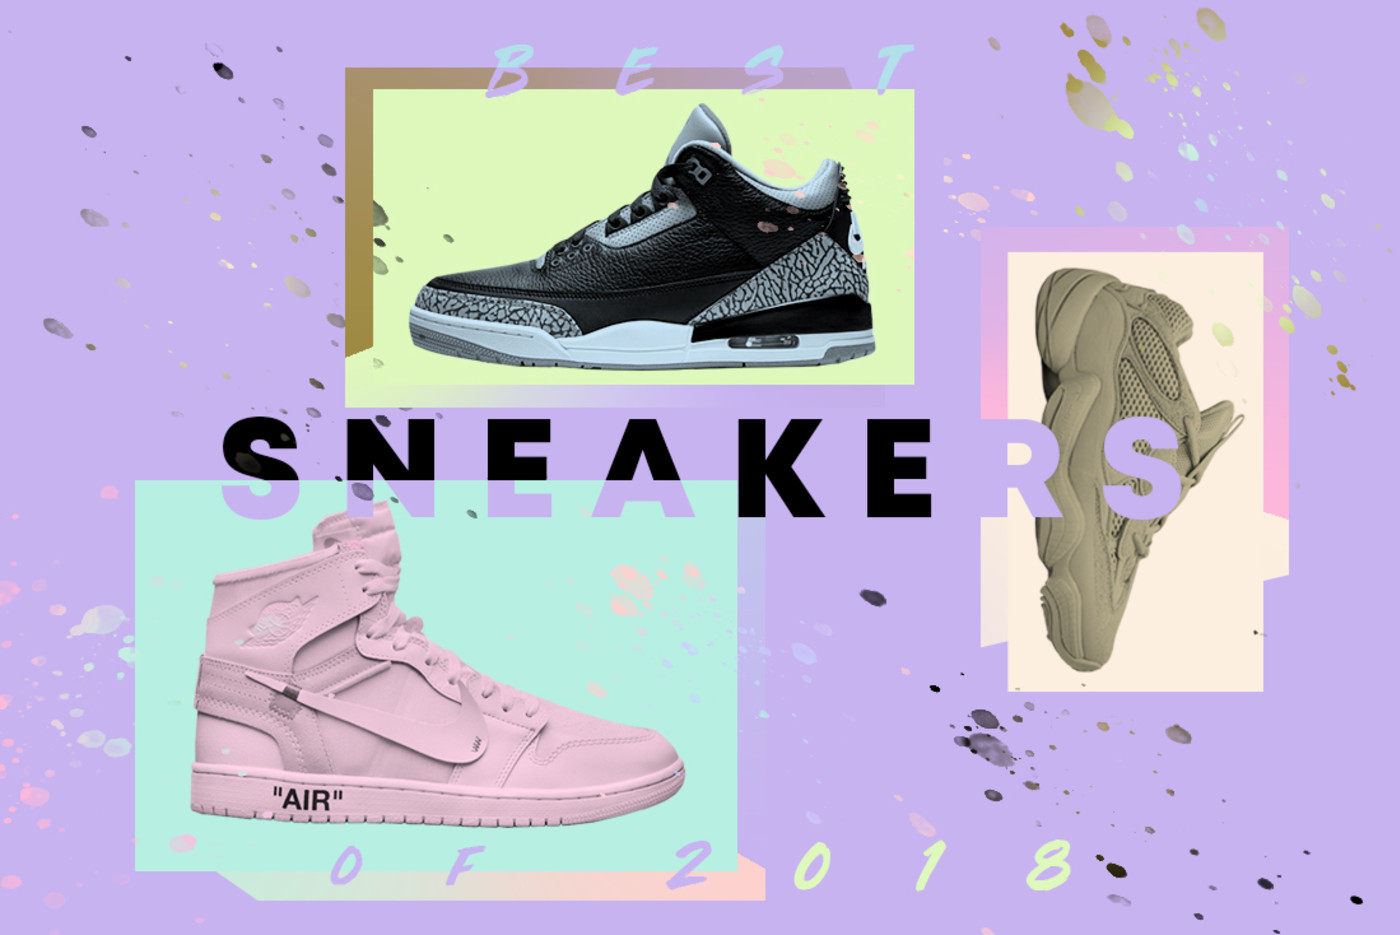 The Best Sneakers of 2018